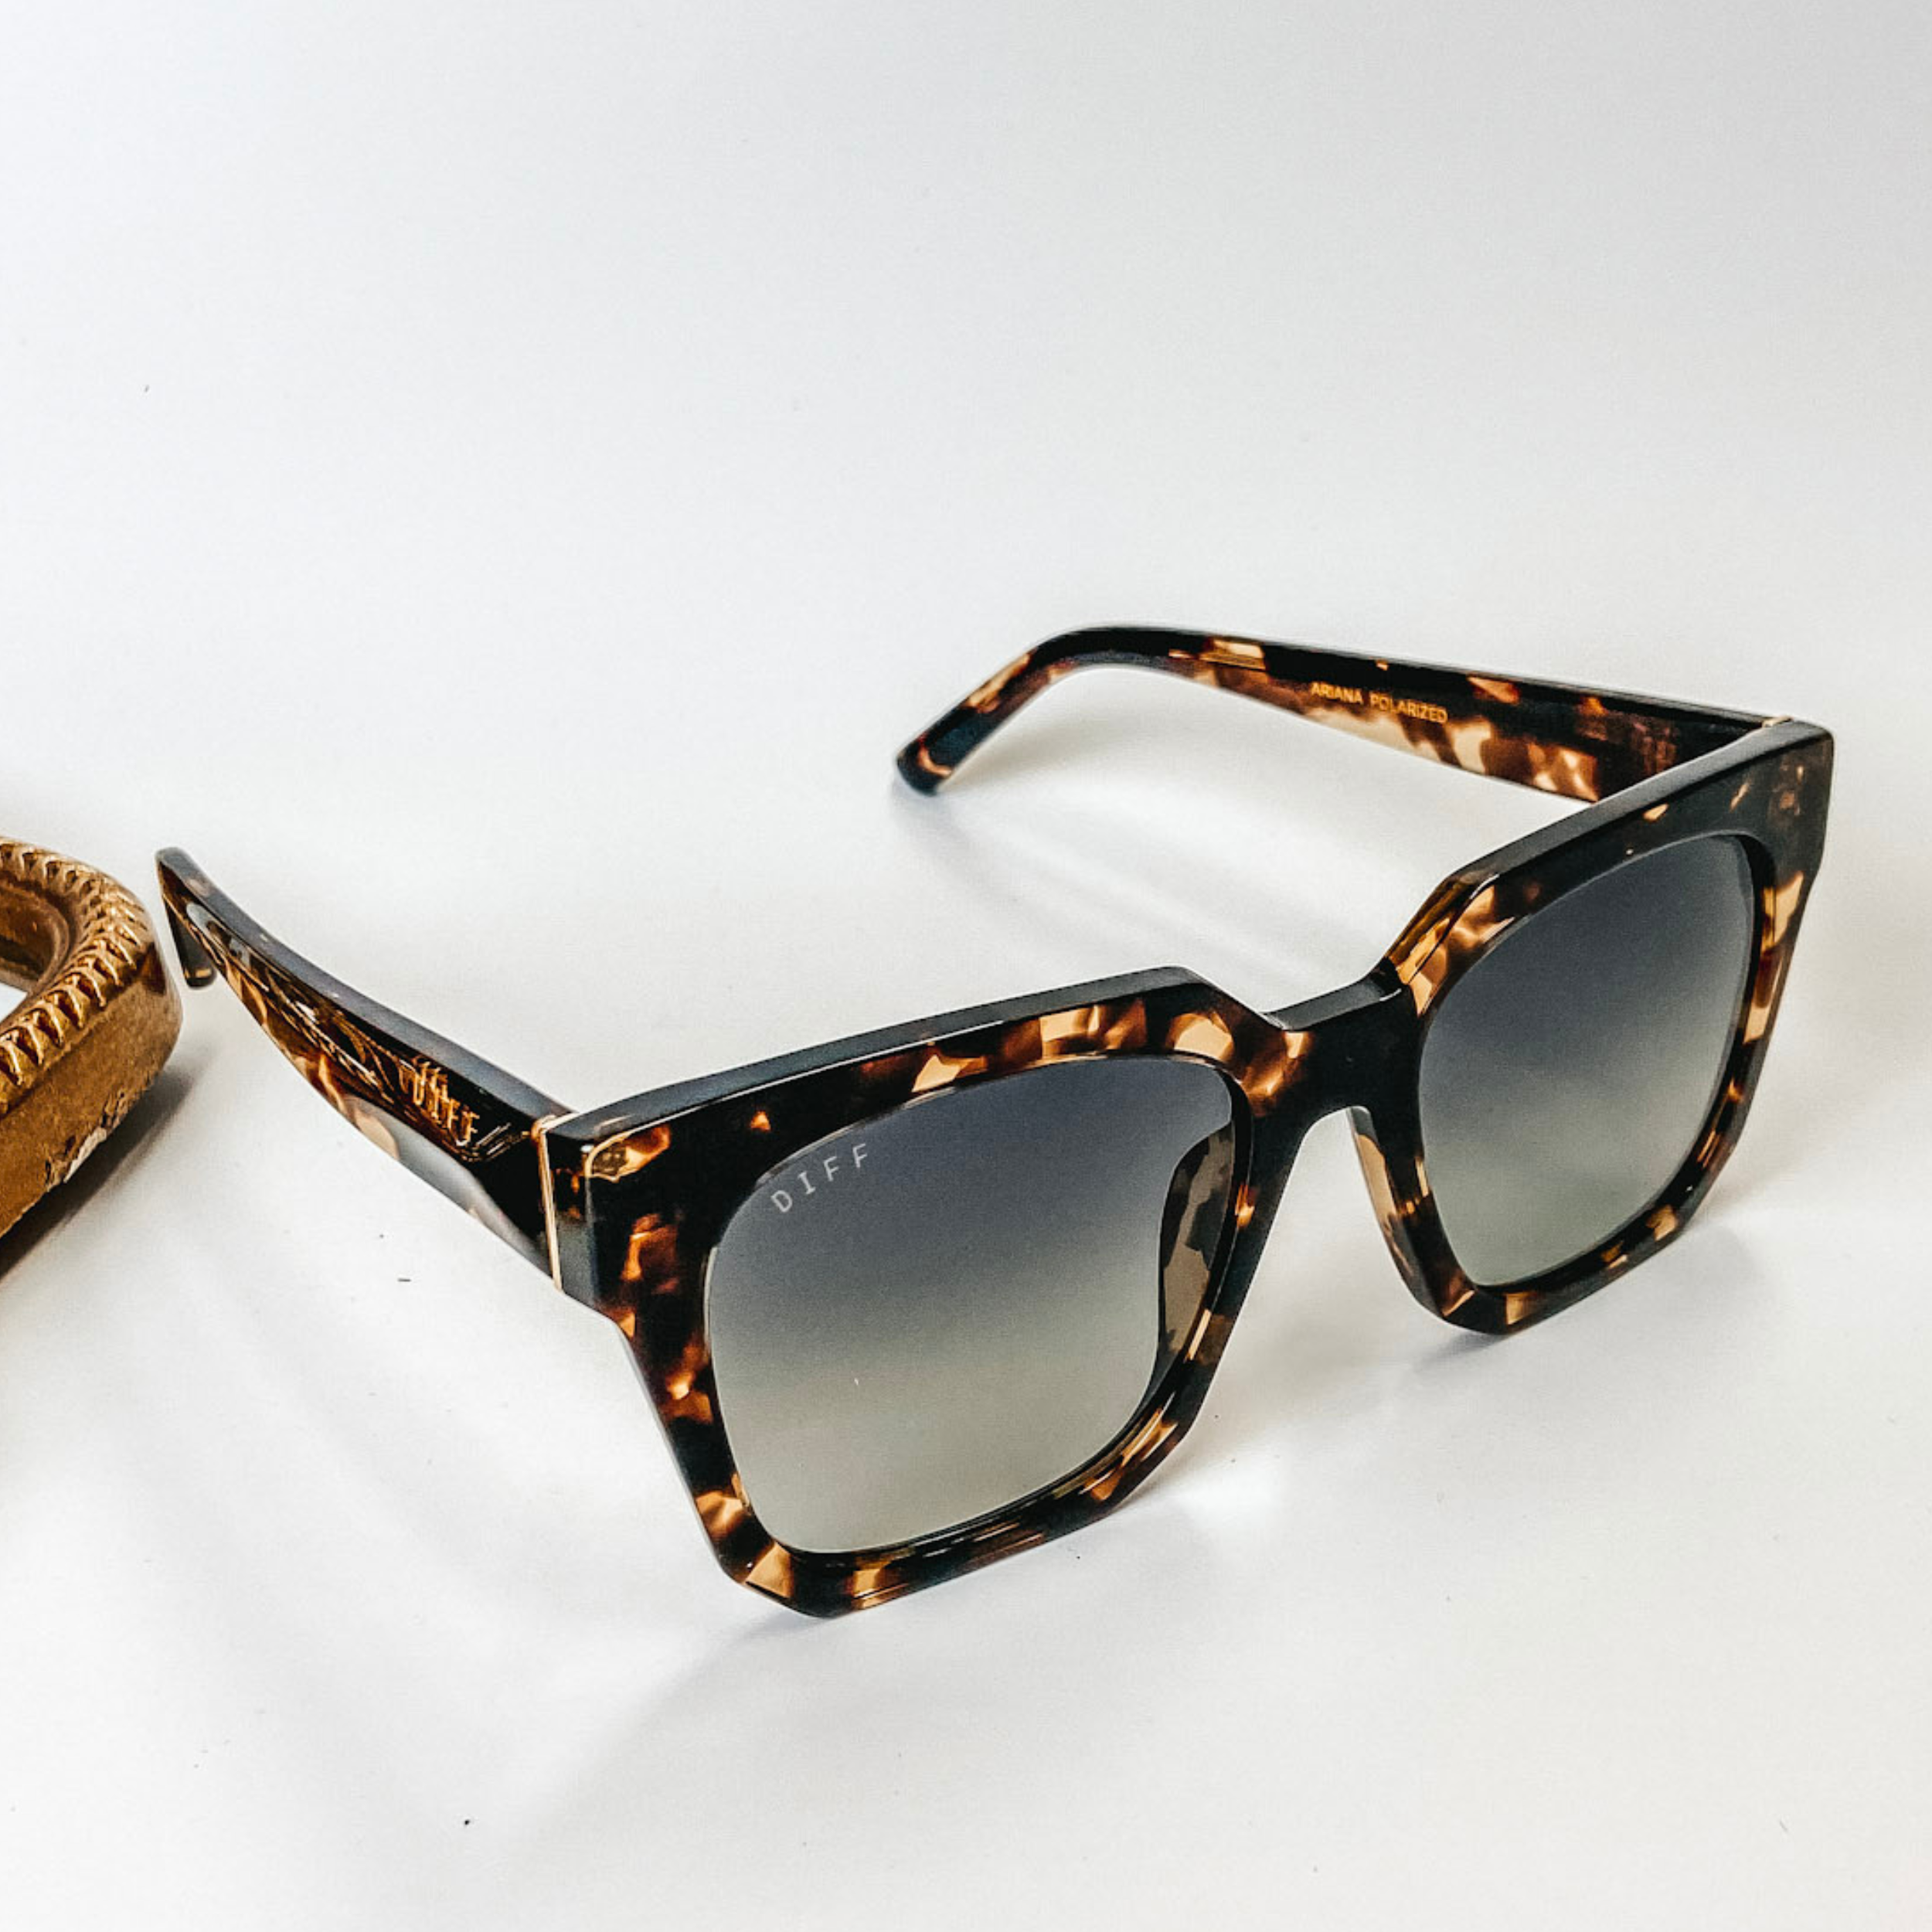 A pair of tortoise print frame sunglasses with gradient square lenses in black. These sunglasses are pictured on a white background with gold jewelry.